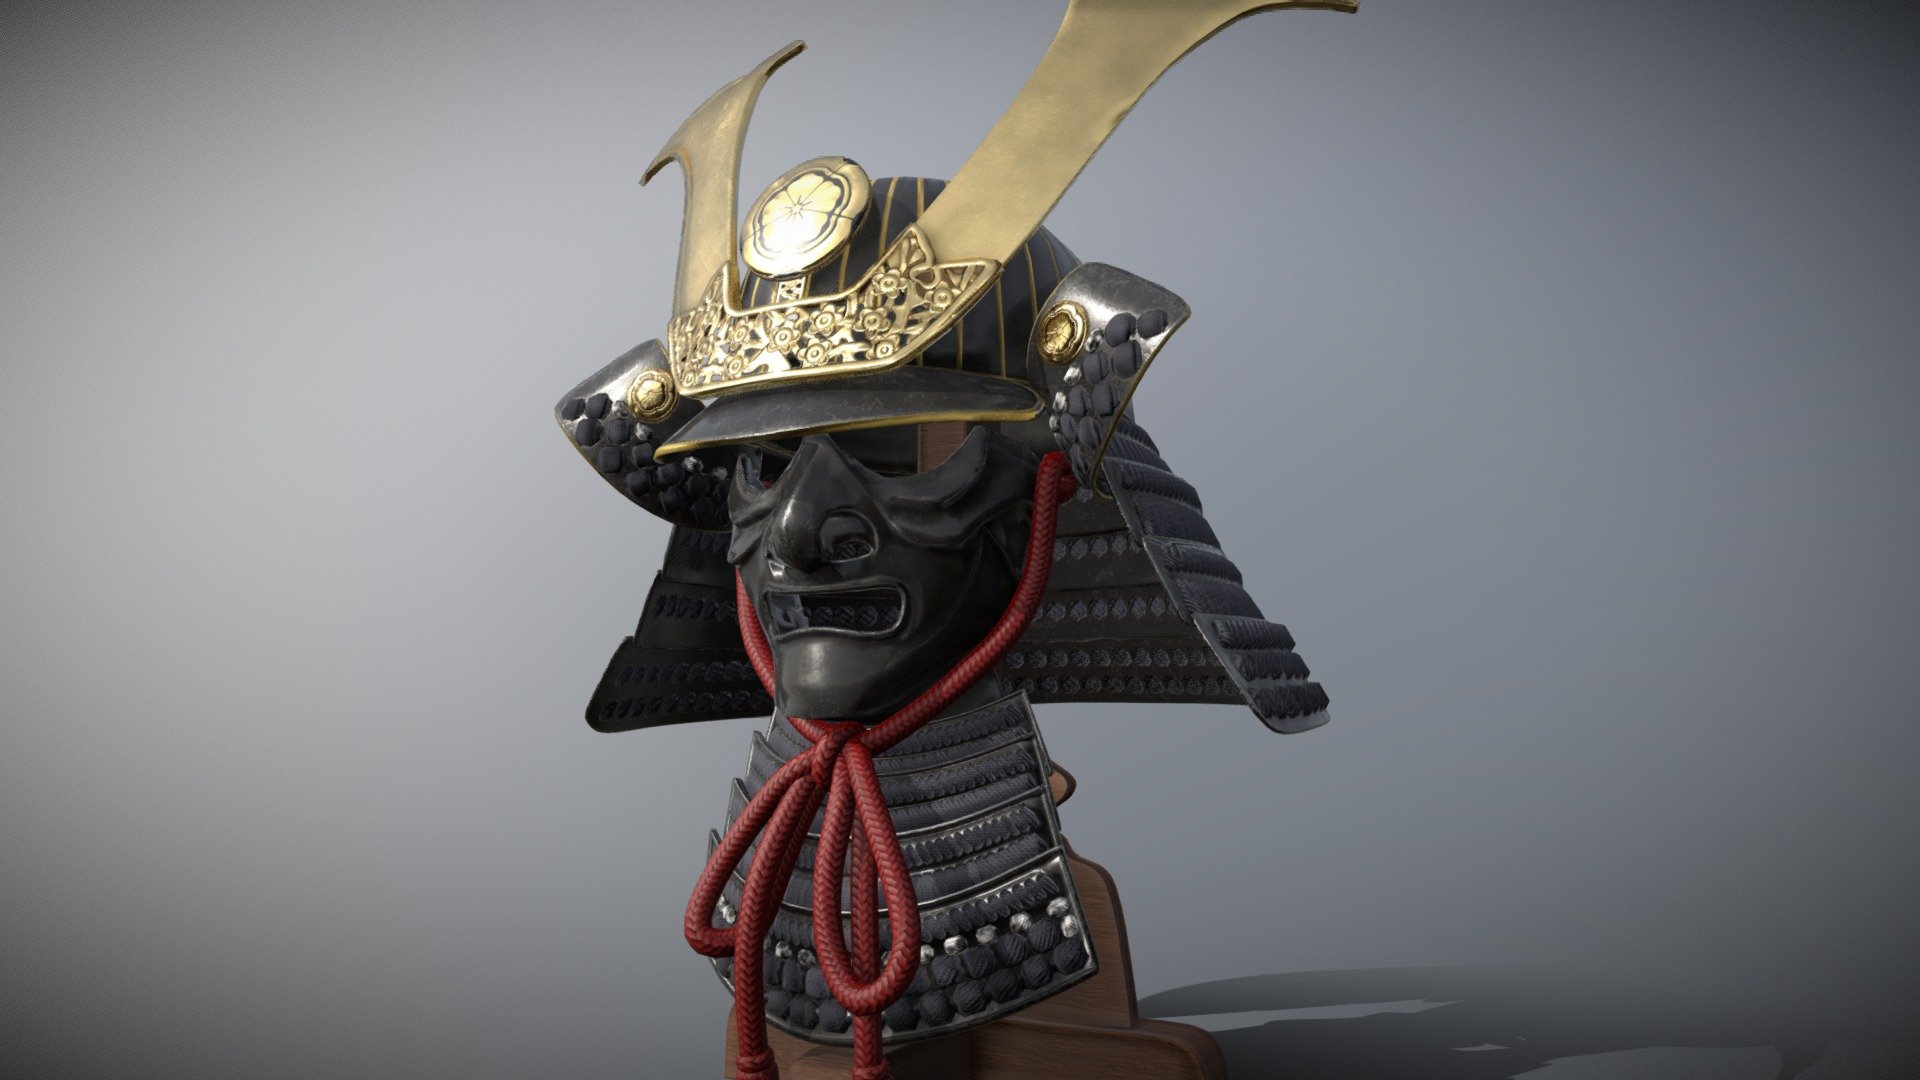 Samurai Helmet/Kabuto made in blender, texturing in substance painter
for handle the sewing on the helmet, i add some extra separate geometry on top the model, rather than only bake it on flat model. Opacity mask also used on same helmet detail (golden part)

However, this method make a bit render issue in sketchfab model viewer, its look fine in blender eeve and cycle, and unreal engine 5.





A unreal engine rendered showcase here:

https://youtu.be/CyVCIxXdUKI - Samurai Helmet Kabuto model - 3D model by CY (@pcaben) 3d model